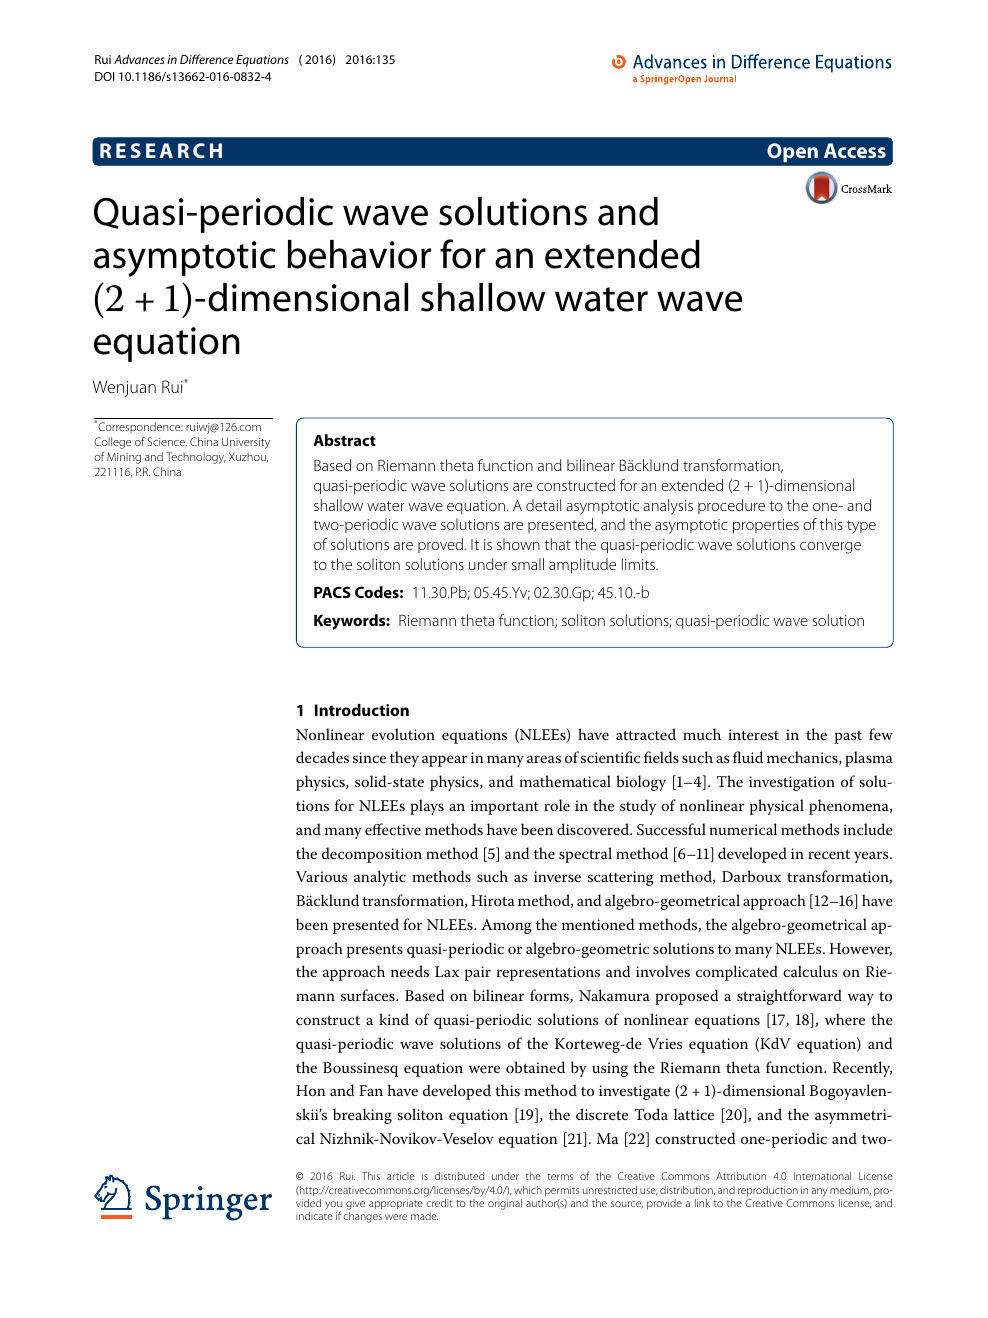 Quasi Periodic Wave Solutions And Asymptotic Behavior For An Extended 2 1 2 1 Dimensional Shallow Water Wave Equation Topic Of Research Paper In Mathematics Download Scholarly Article Pdf And